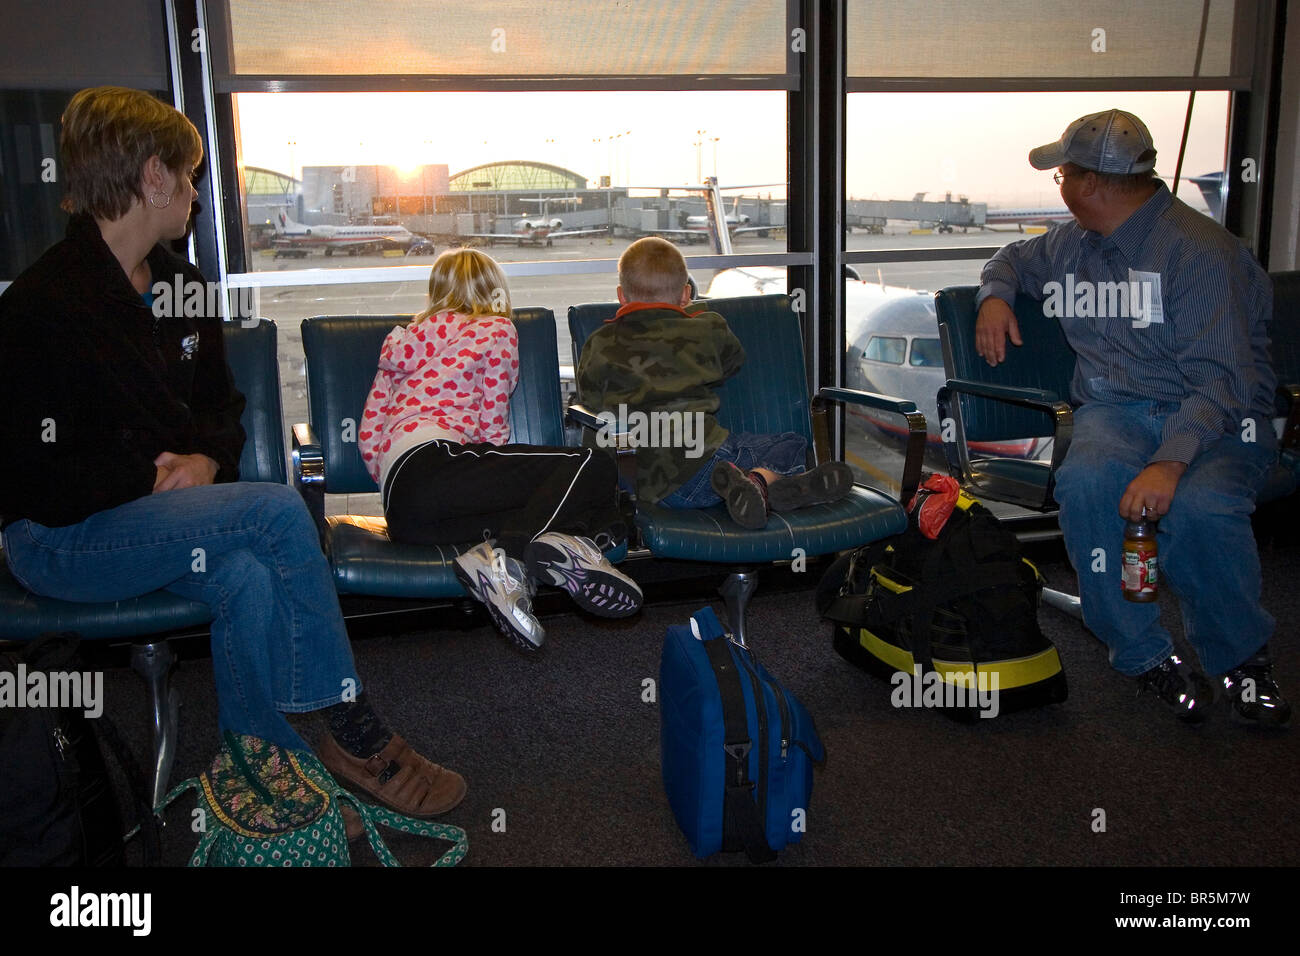 Family of four in airport waiting for their flight at the gate window at sunrise Stock Photo